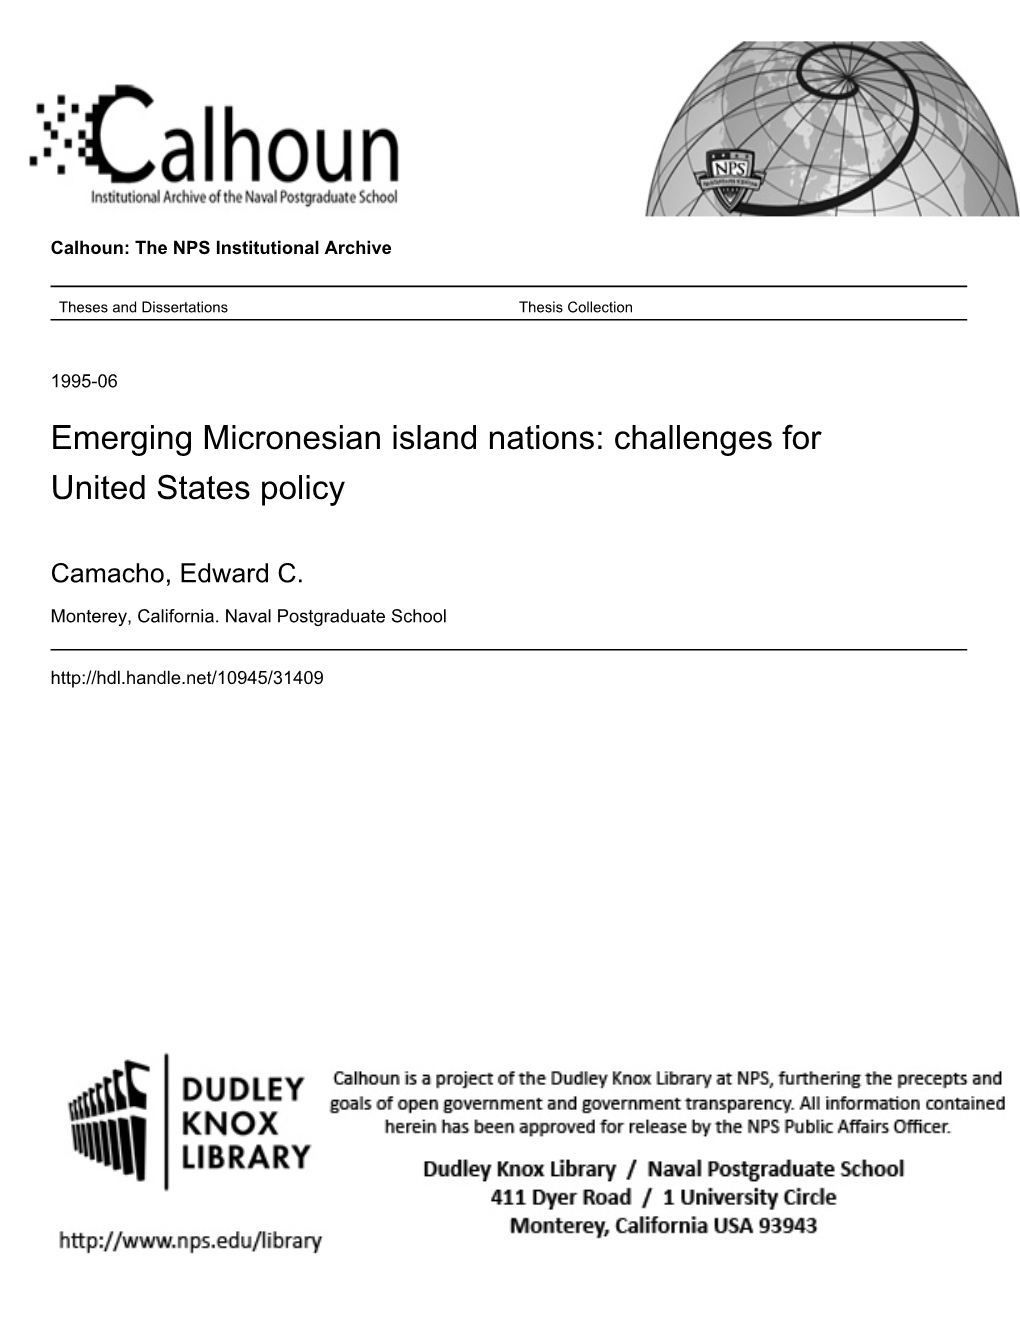 Emerging Micronesian Island Nations: Challenges for United States Policy